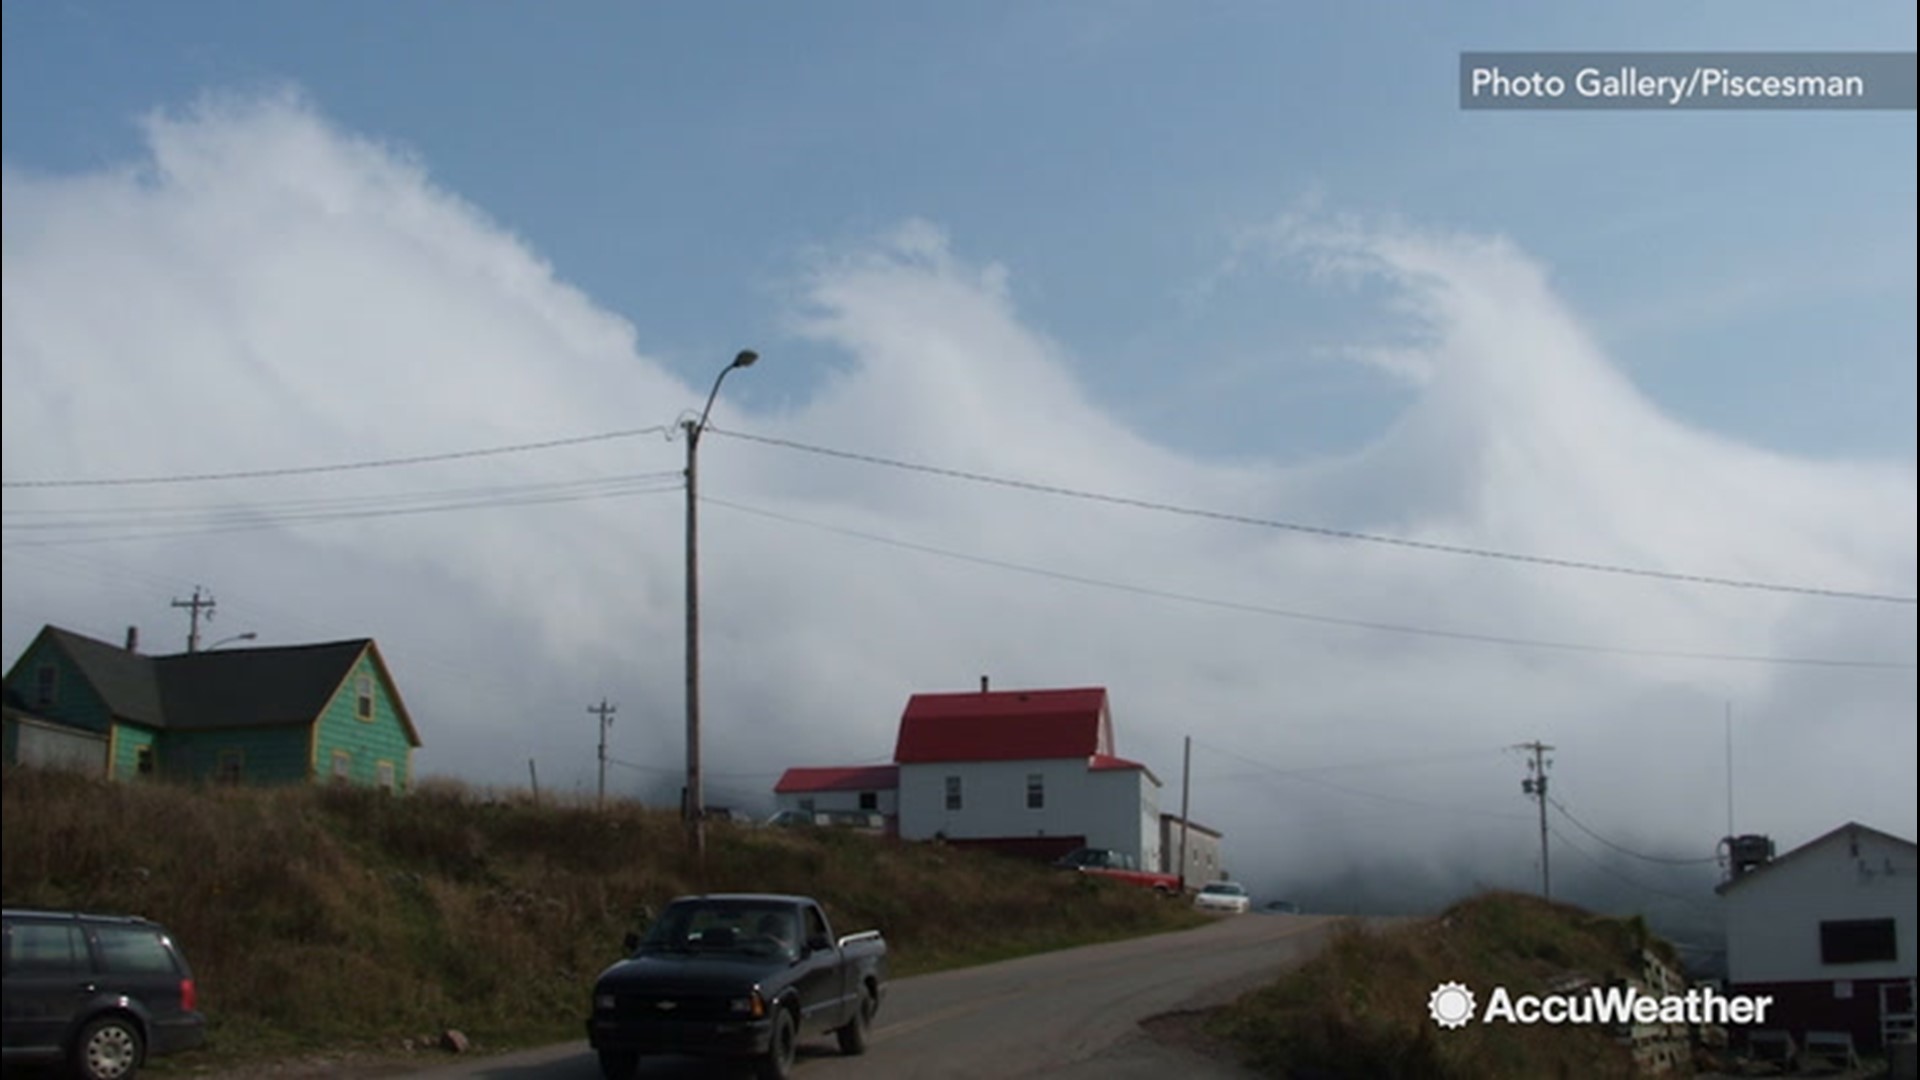 Kelvin-Helmholtz clouds are wave-shaped clouds that indicate an area of unstable and turbulent air. AccuWeather meteorologist Reed Timmer explains this amazing phenomena.